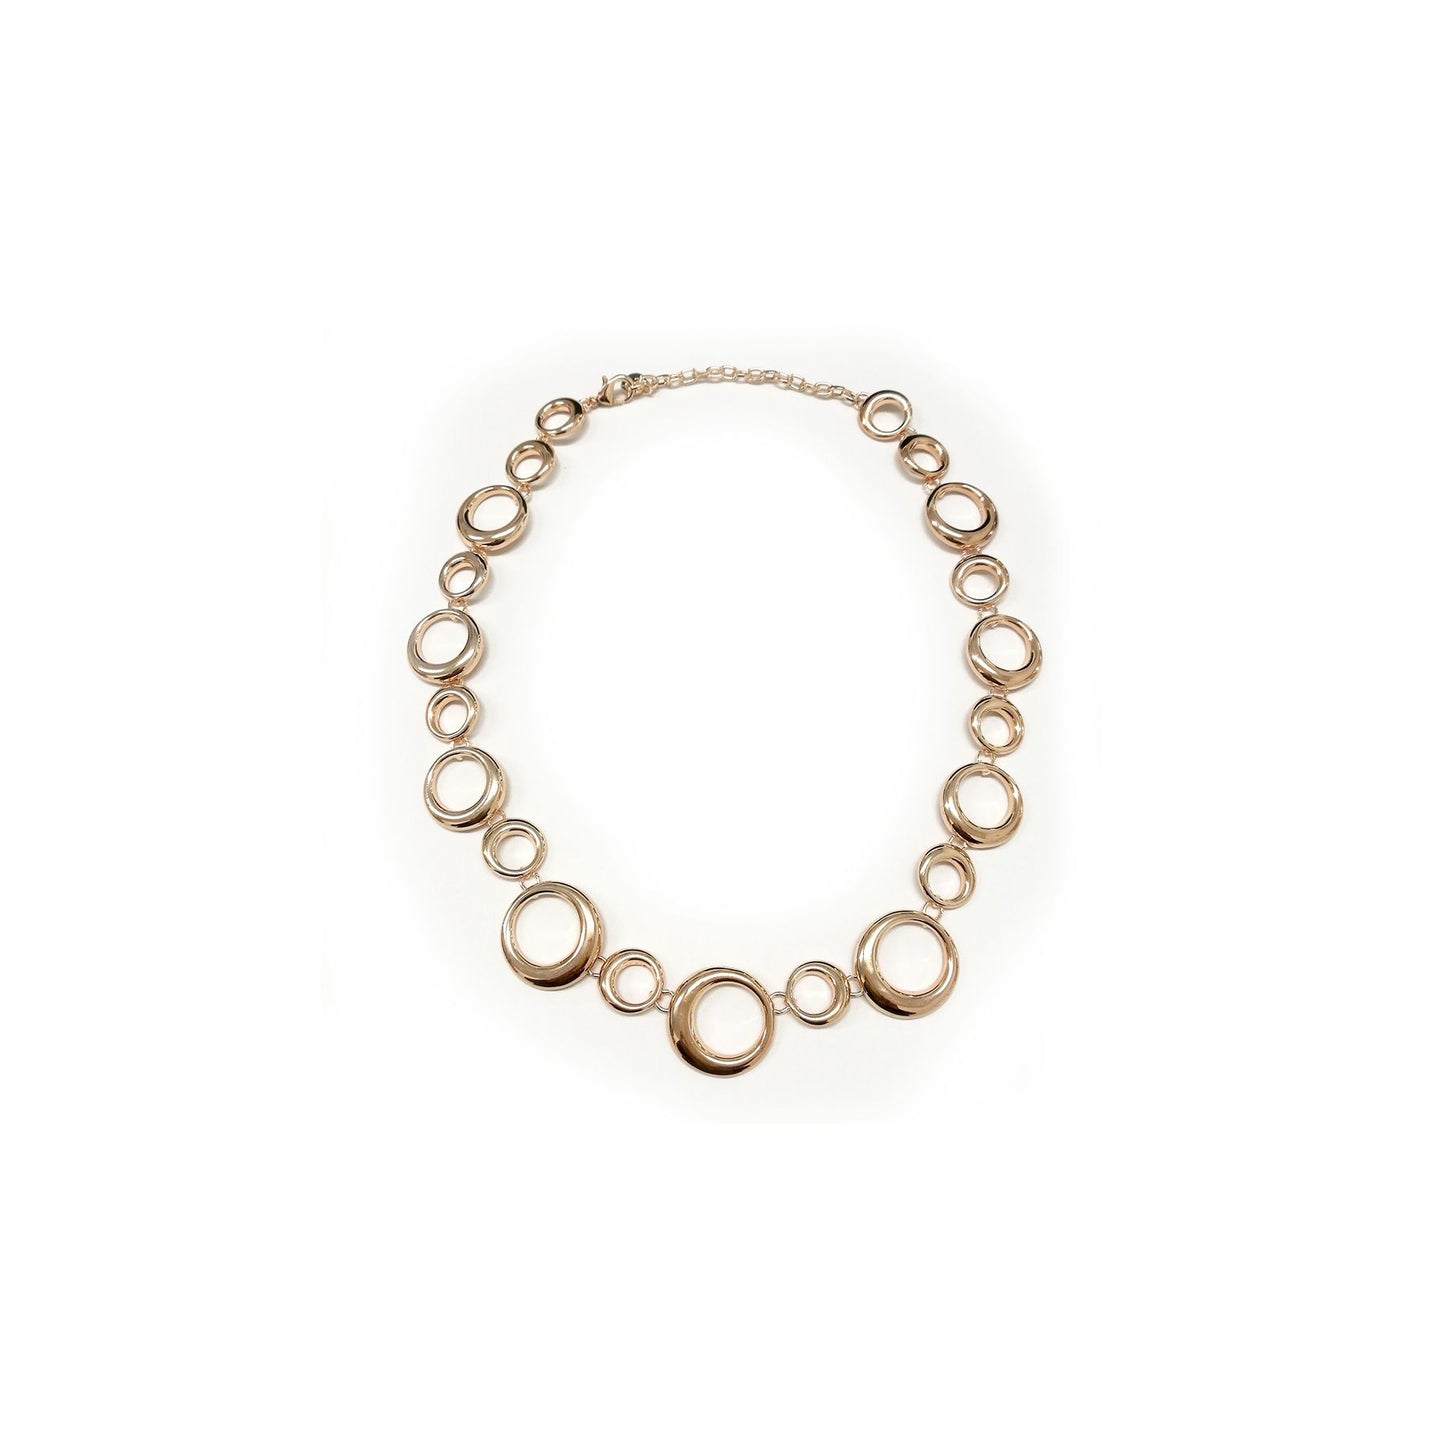 Bubbles - Rose Gold Circles Adjustable Collar Necklace from Frinkle